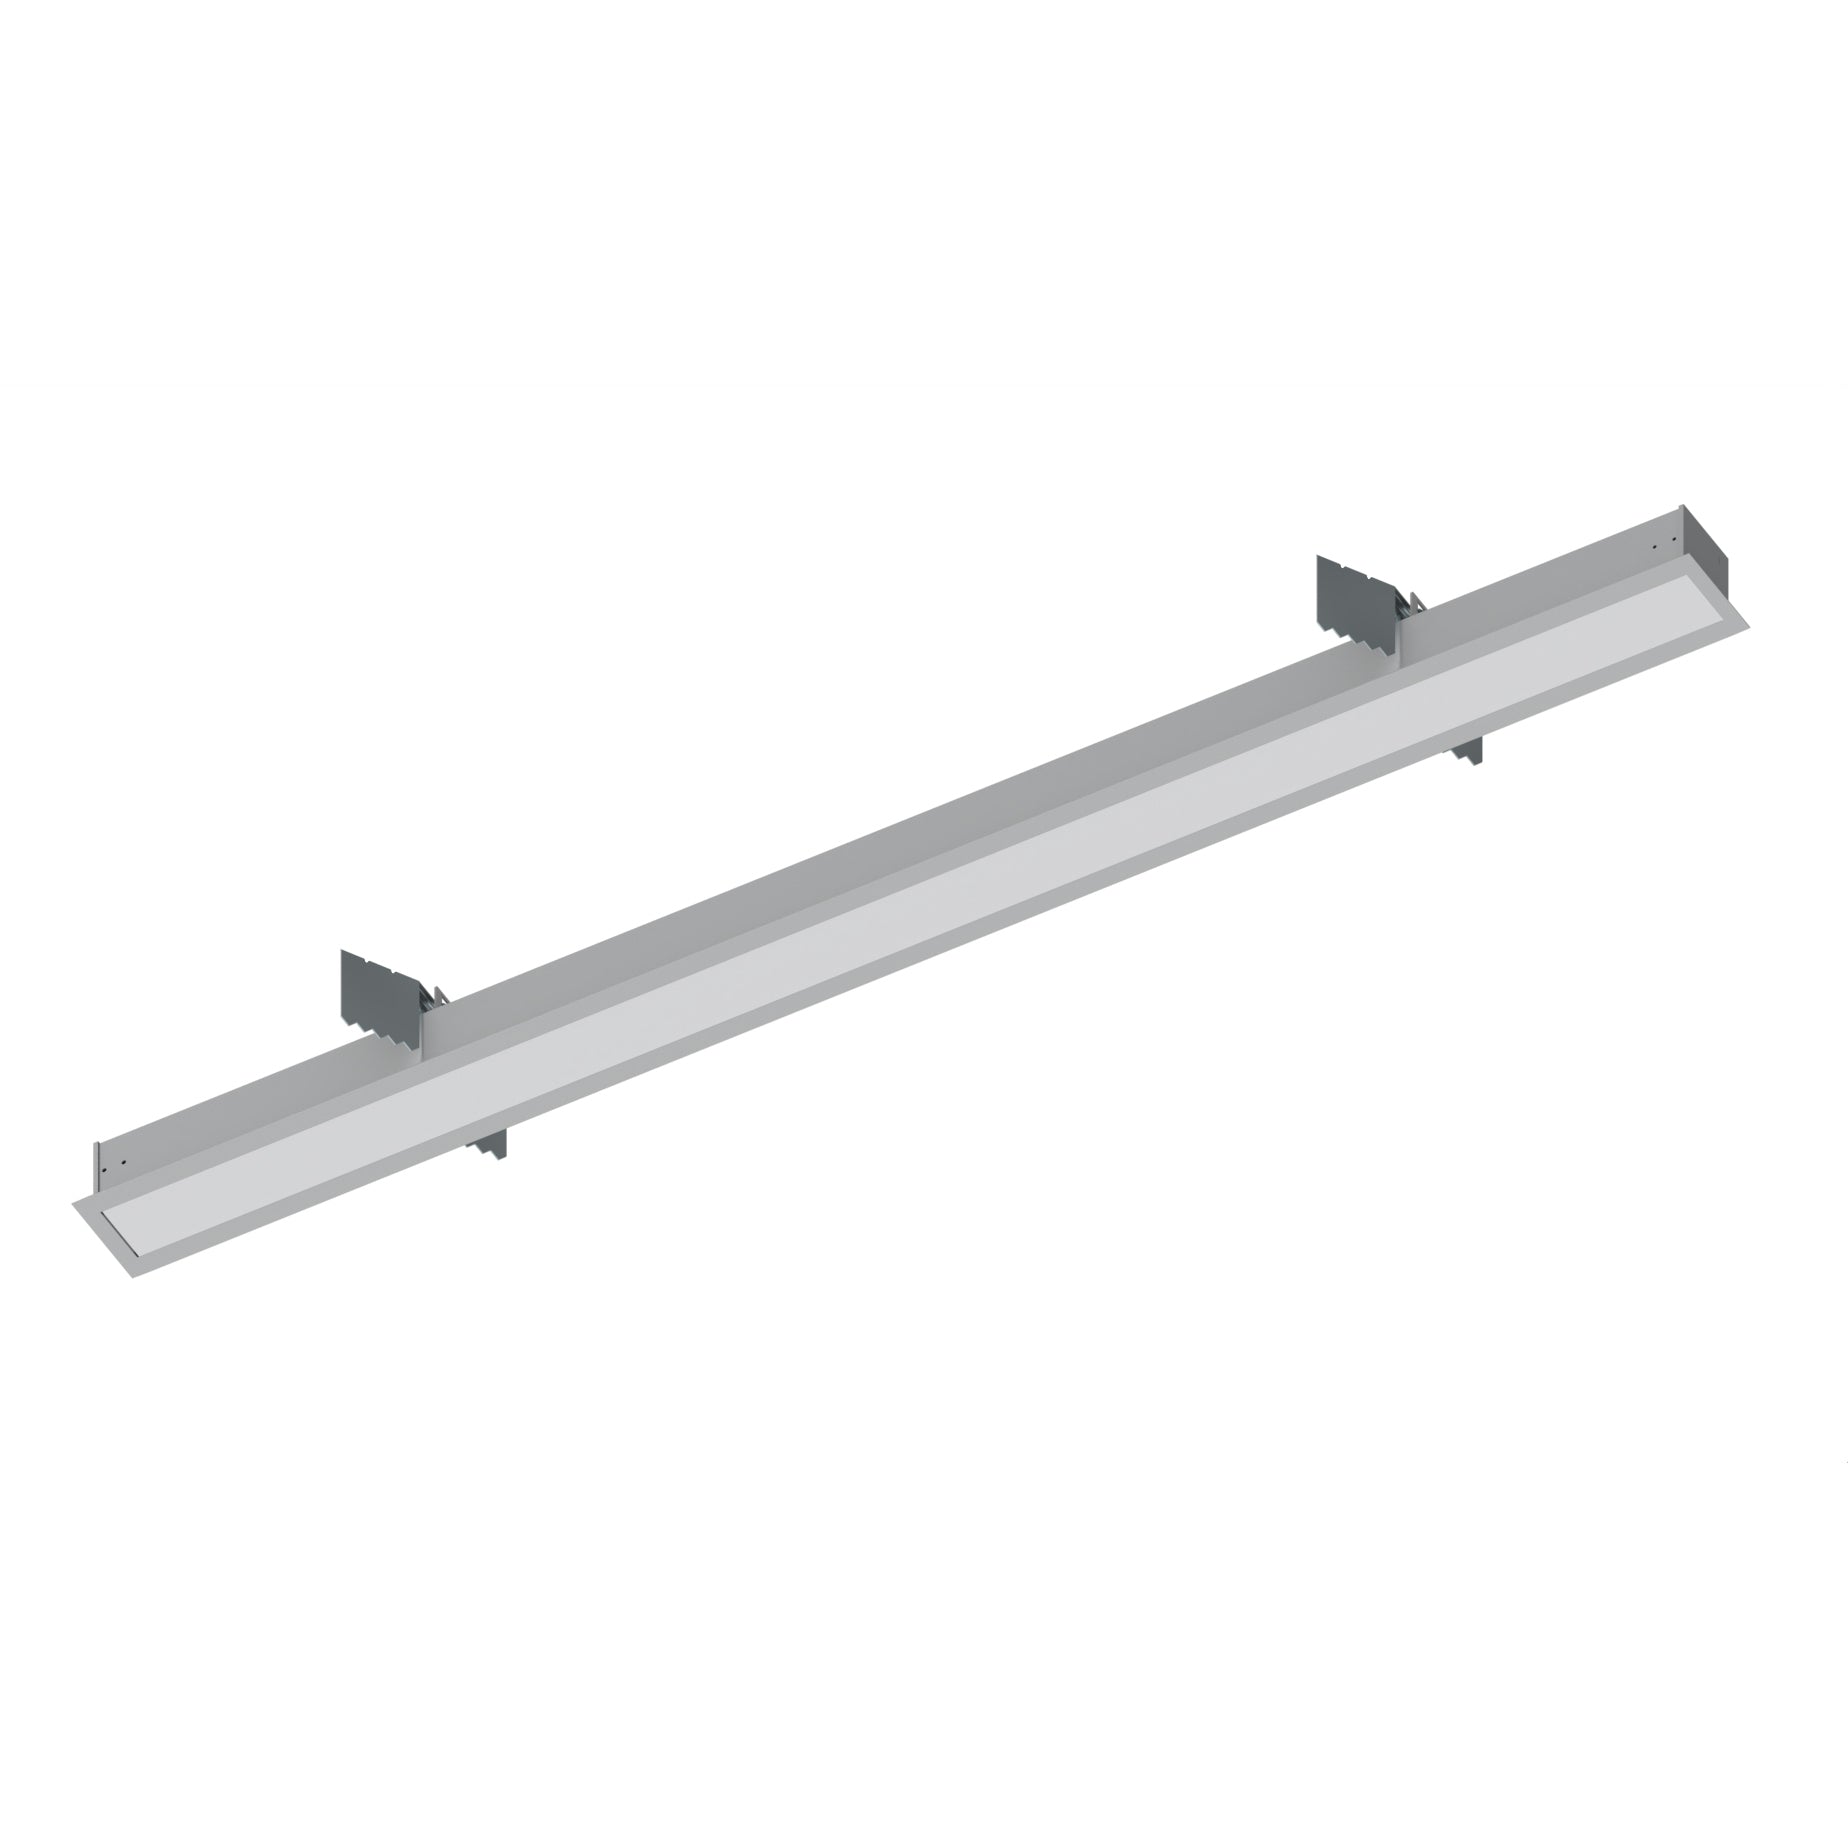 Nora Lighting NRLIN-41040A - Linear - 4' L-Line LED Recessed Linear, 4200lm / 4000K, Aluminum Finish